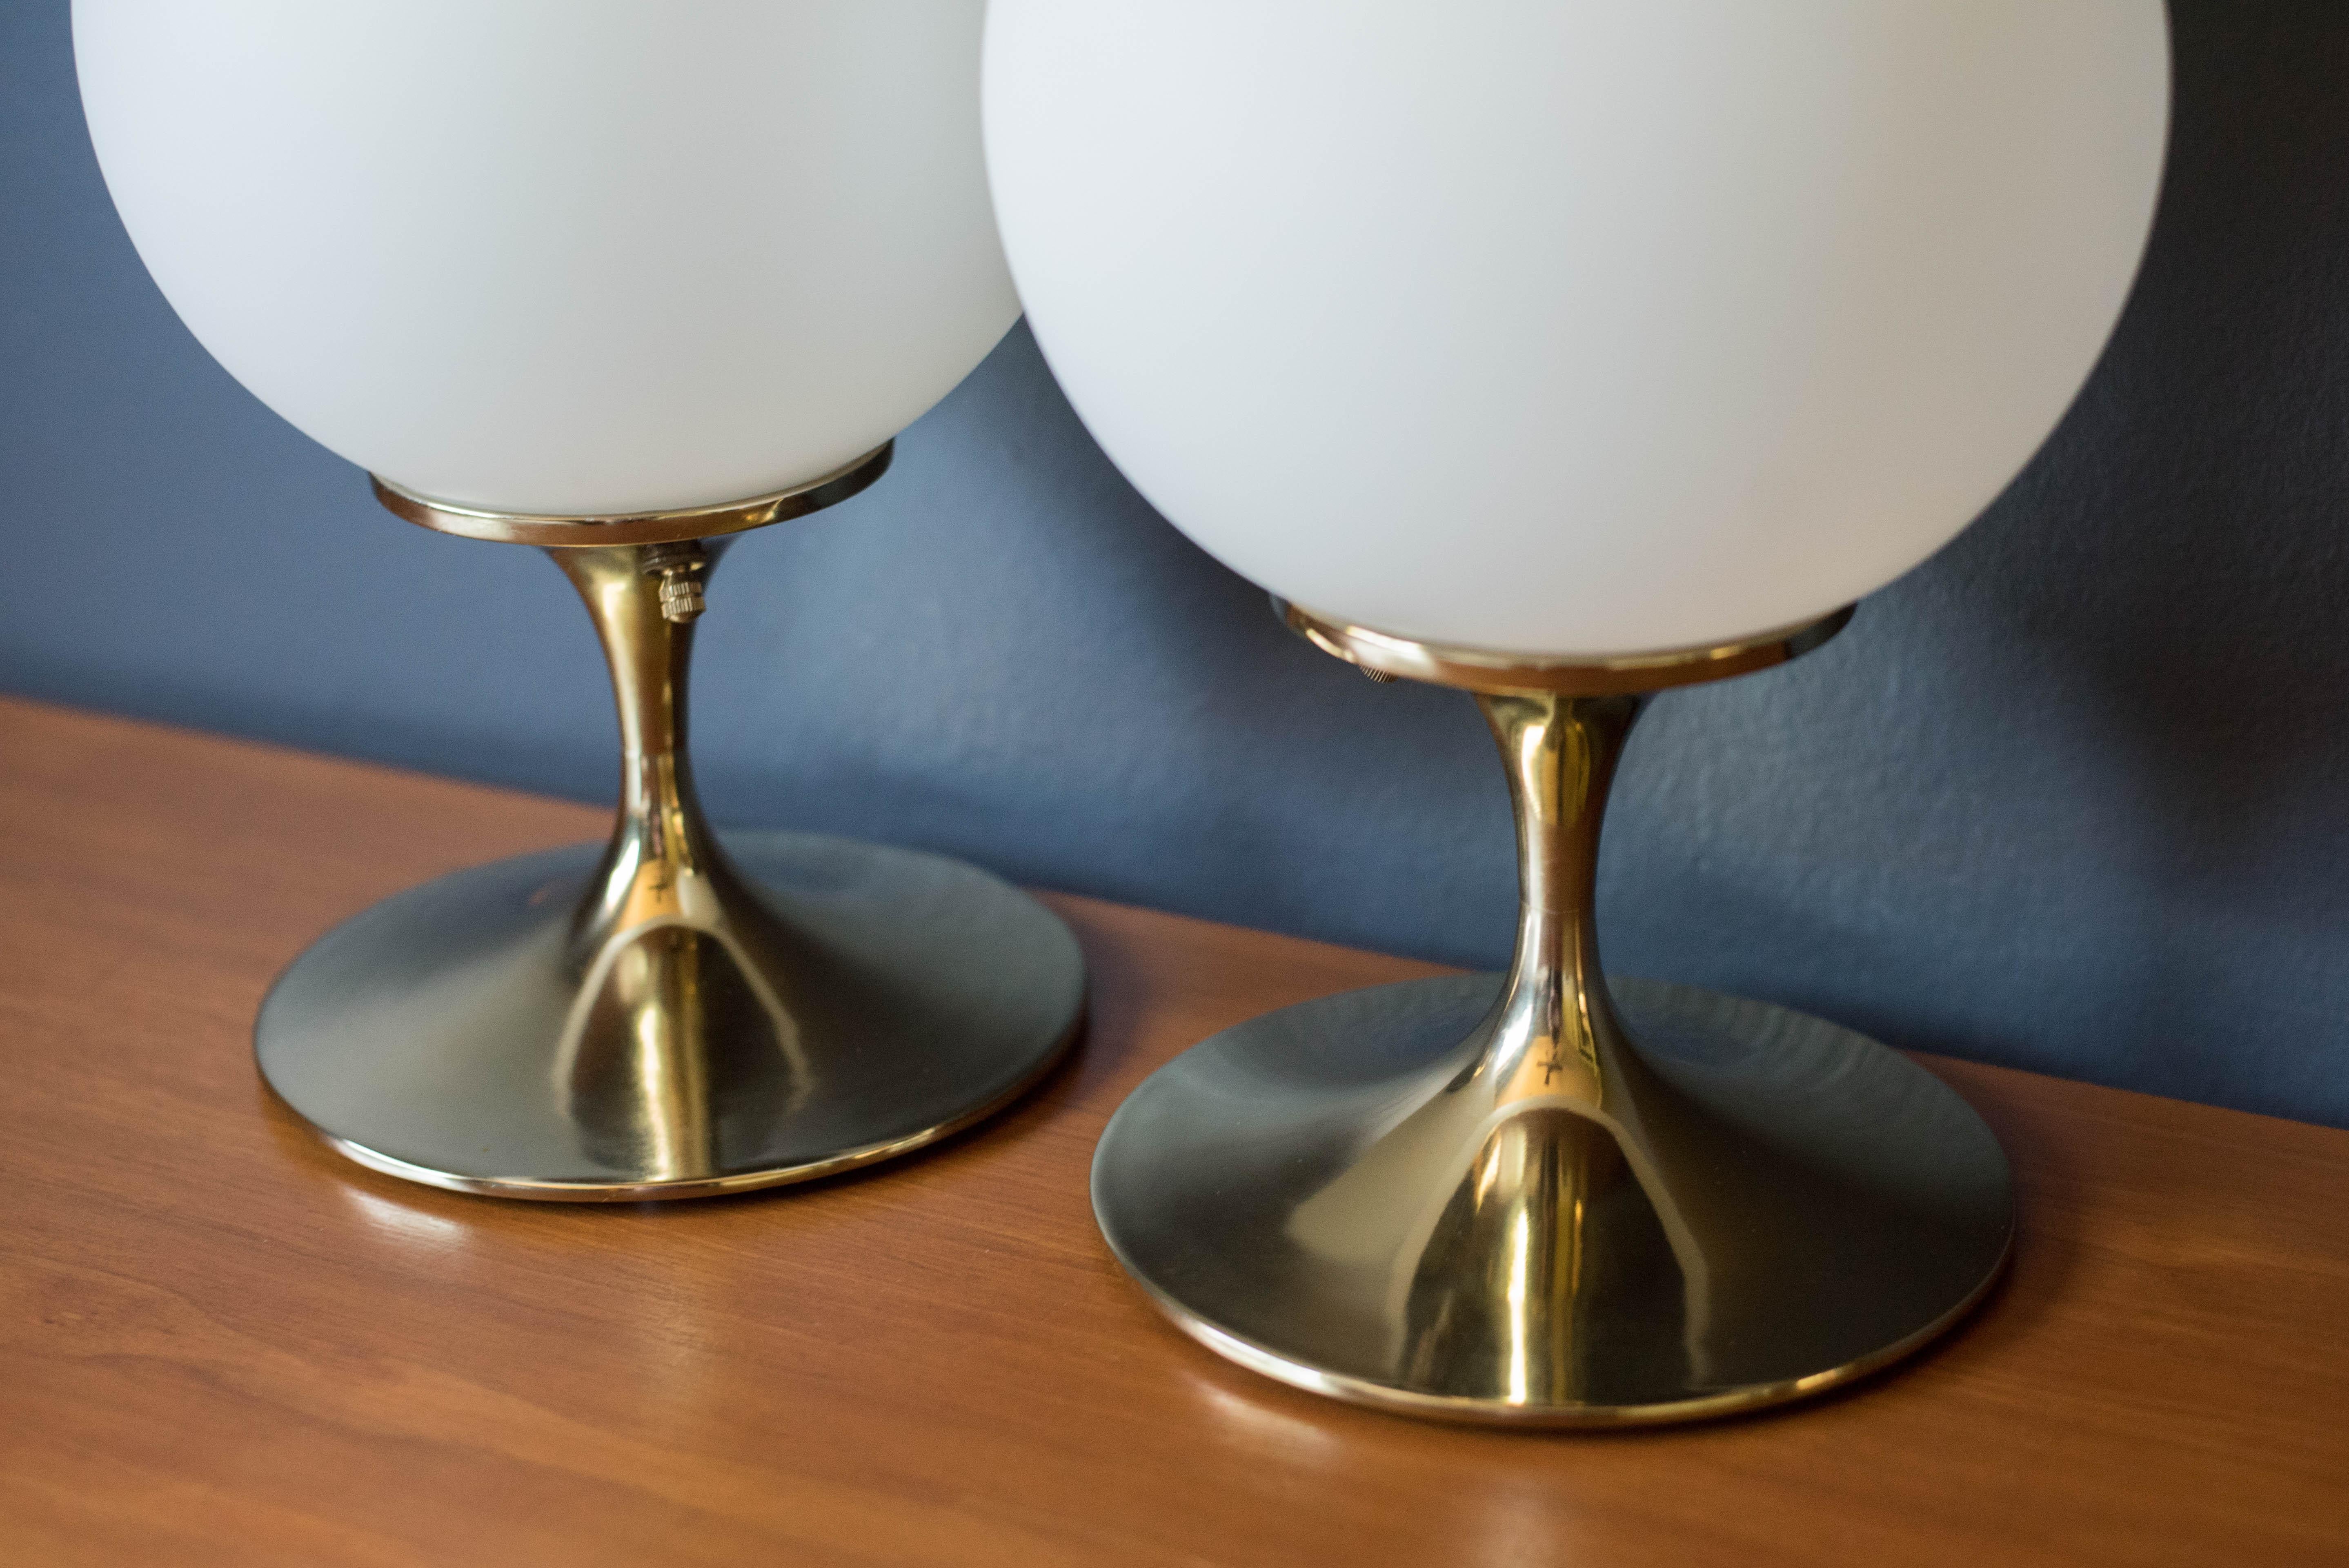 American Vintage Pair of Sculptural Brass Round Globe Table Lamps by Laurel